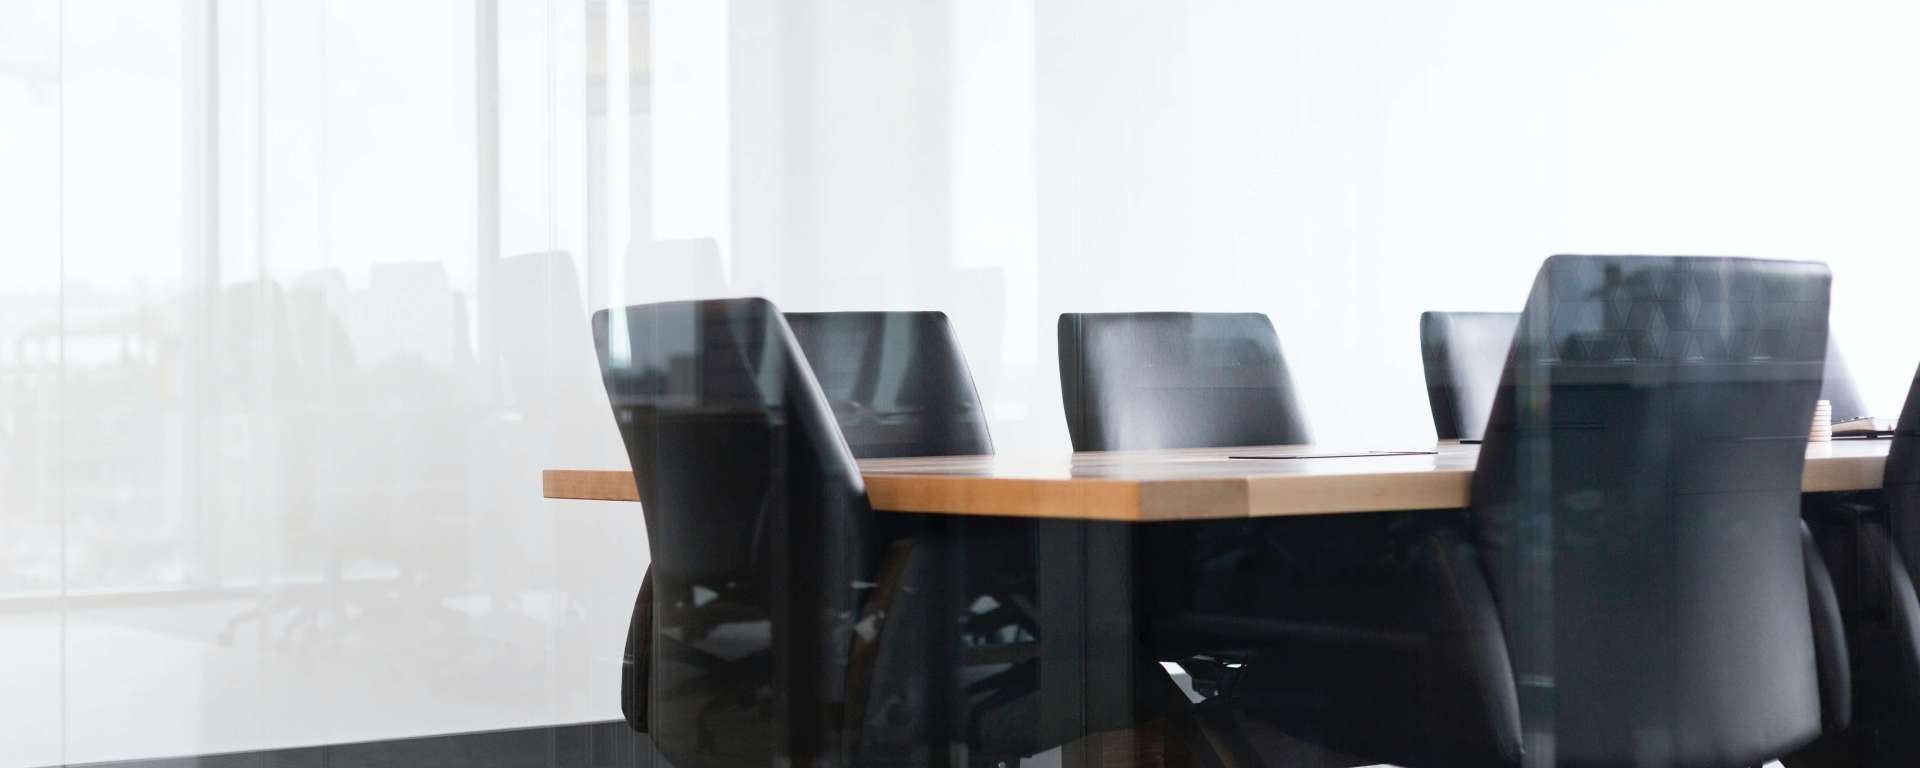 Empty chairs around a conference table